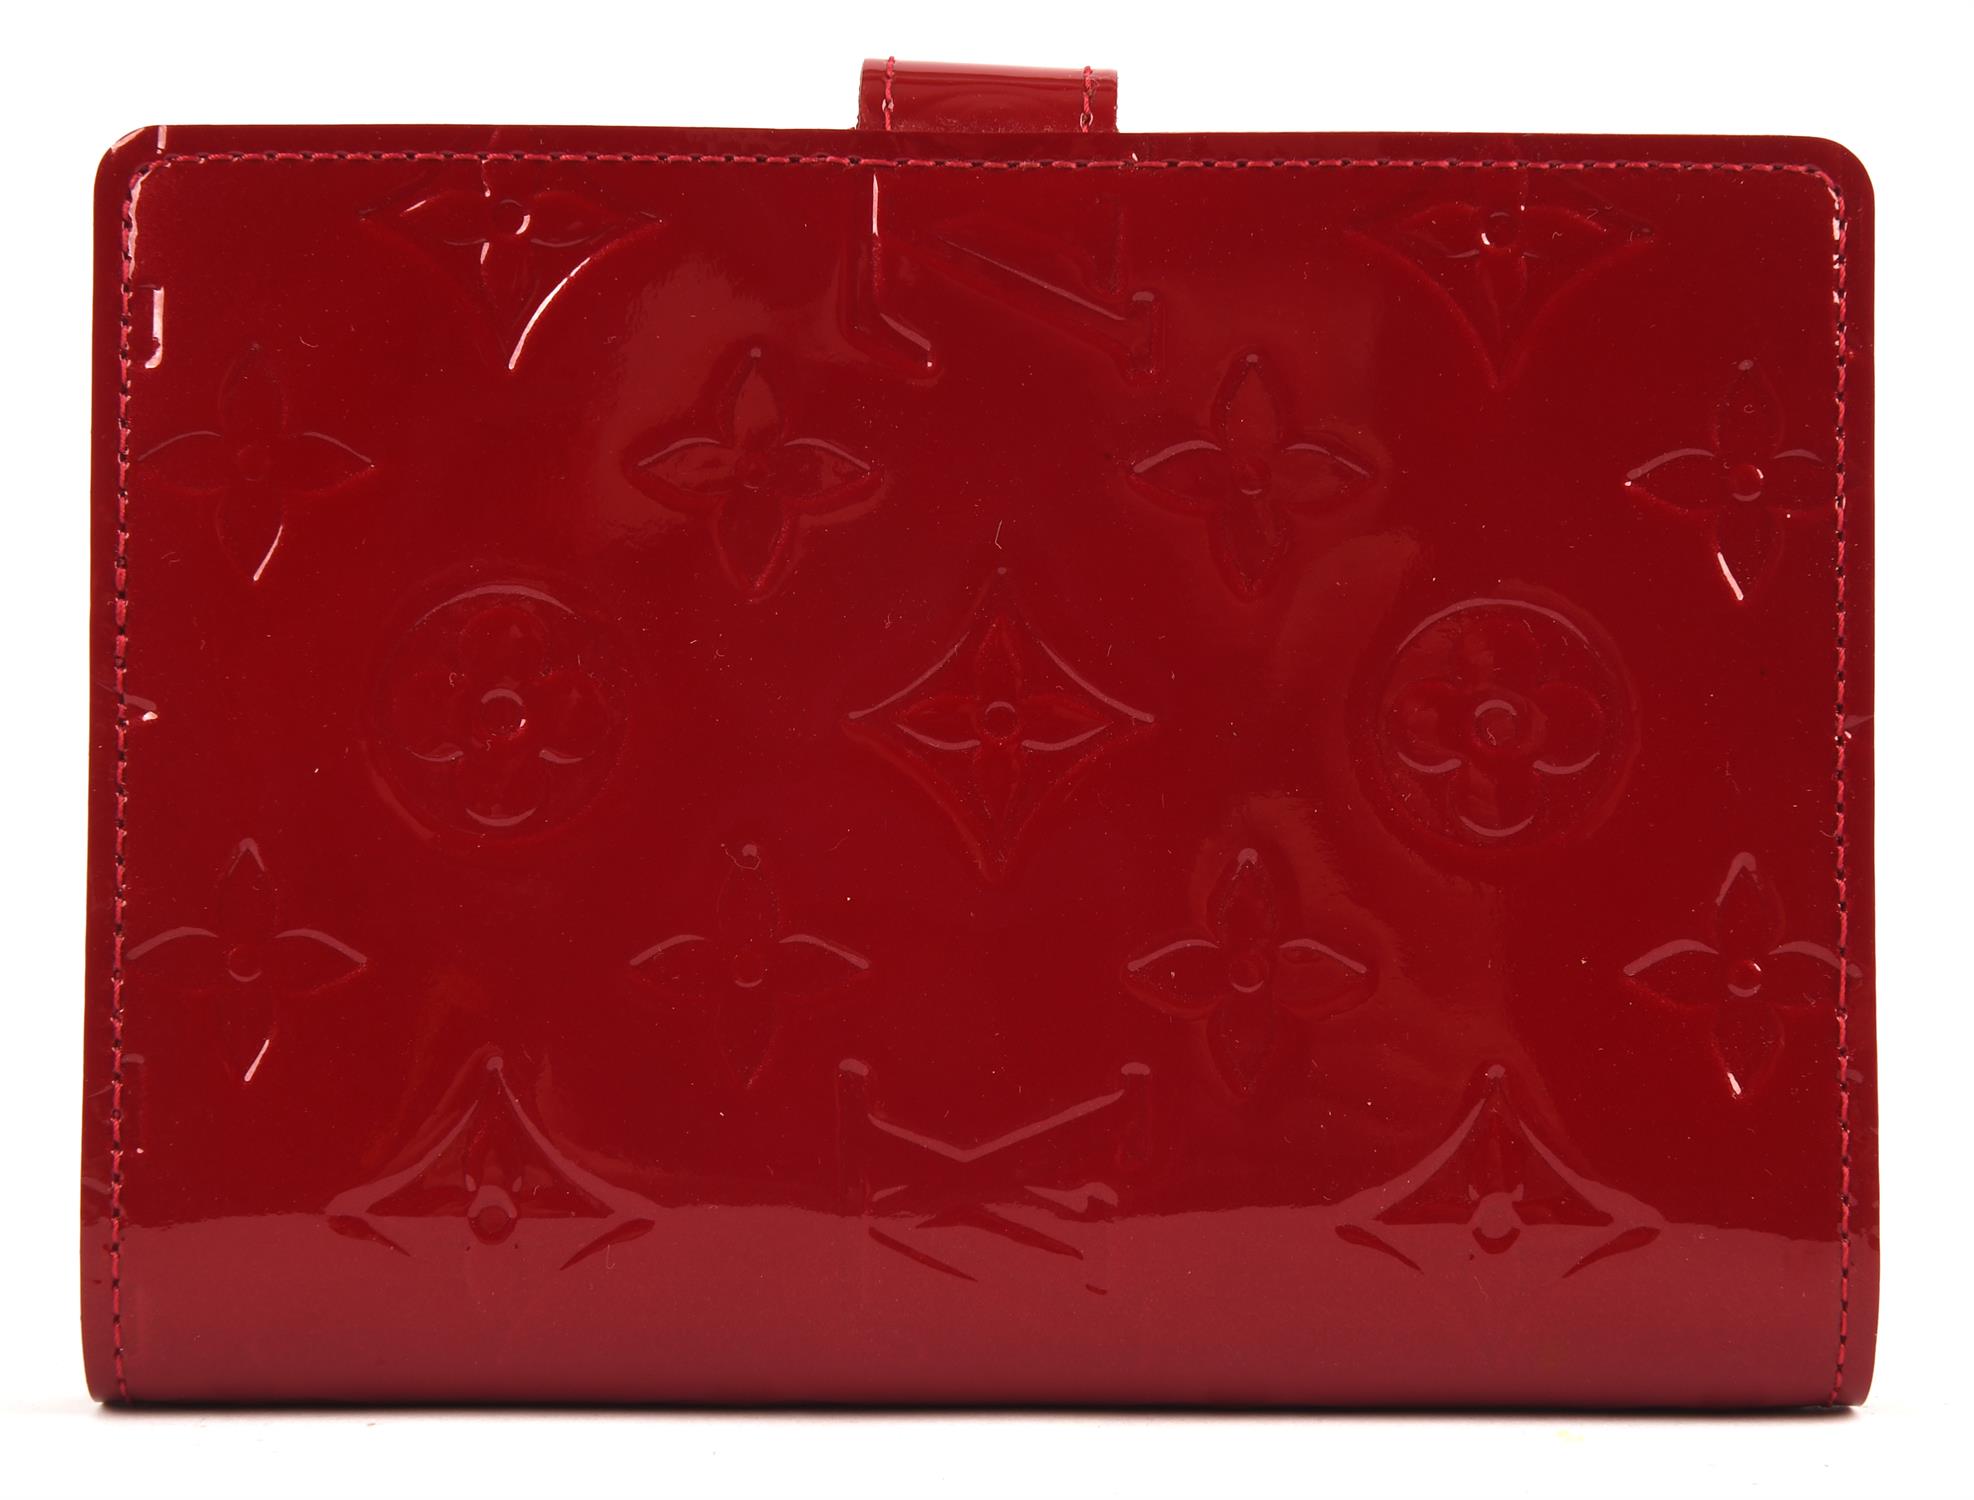 LOUIS VUITTON boxed lipstick red Vernis varnished leather note book with ballpoint pen (untested) - Image 3 of 3